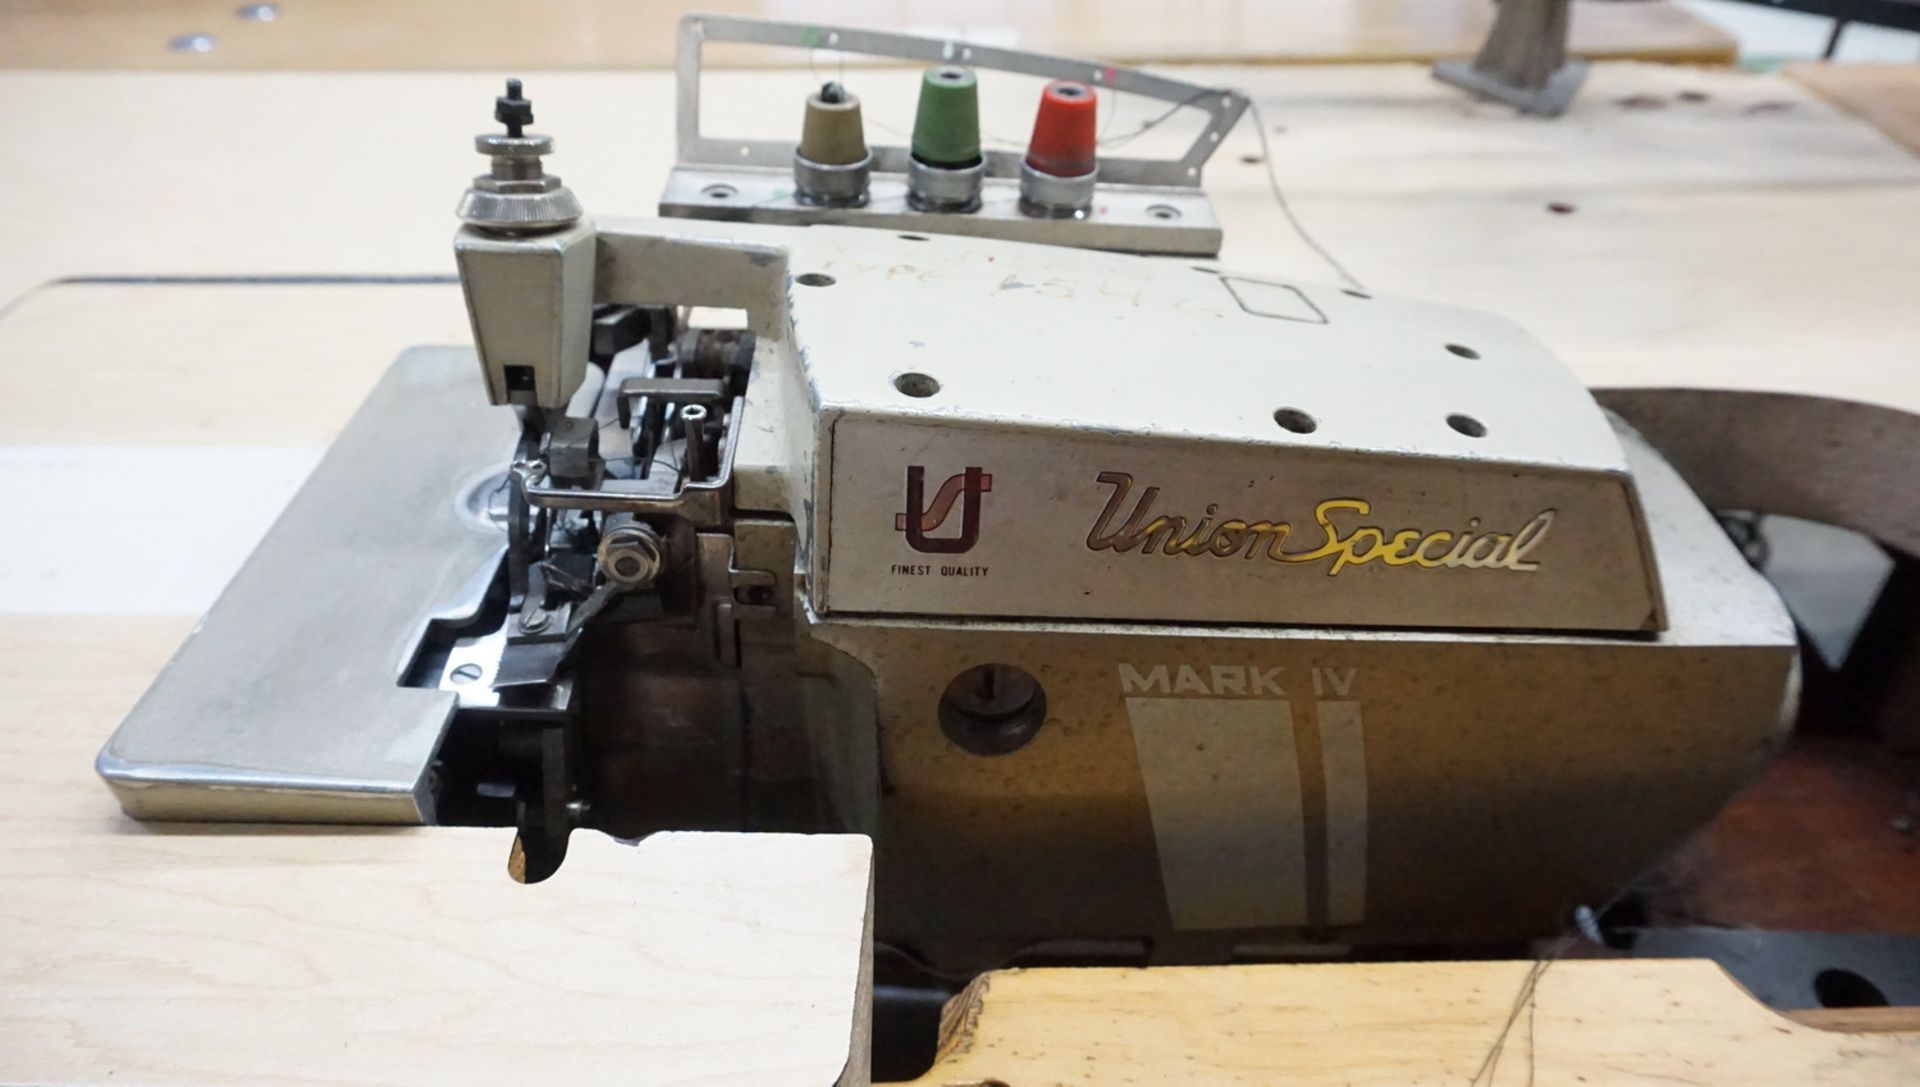 UNION SPECIAL 395000W 4-THREAD SERGER - Image 2 of 3